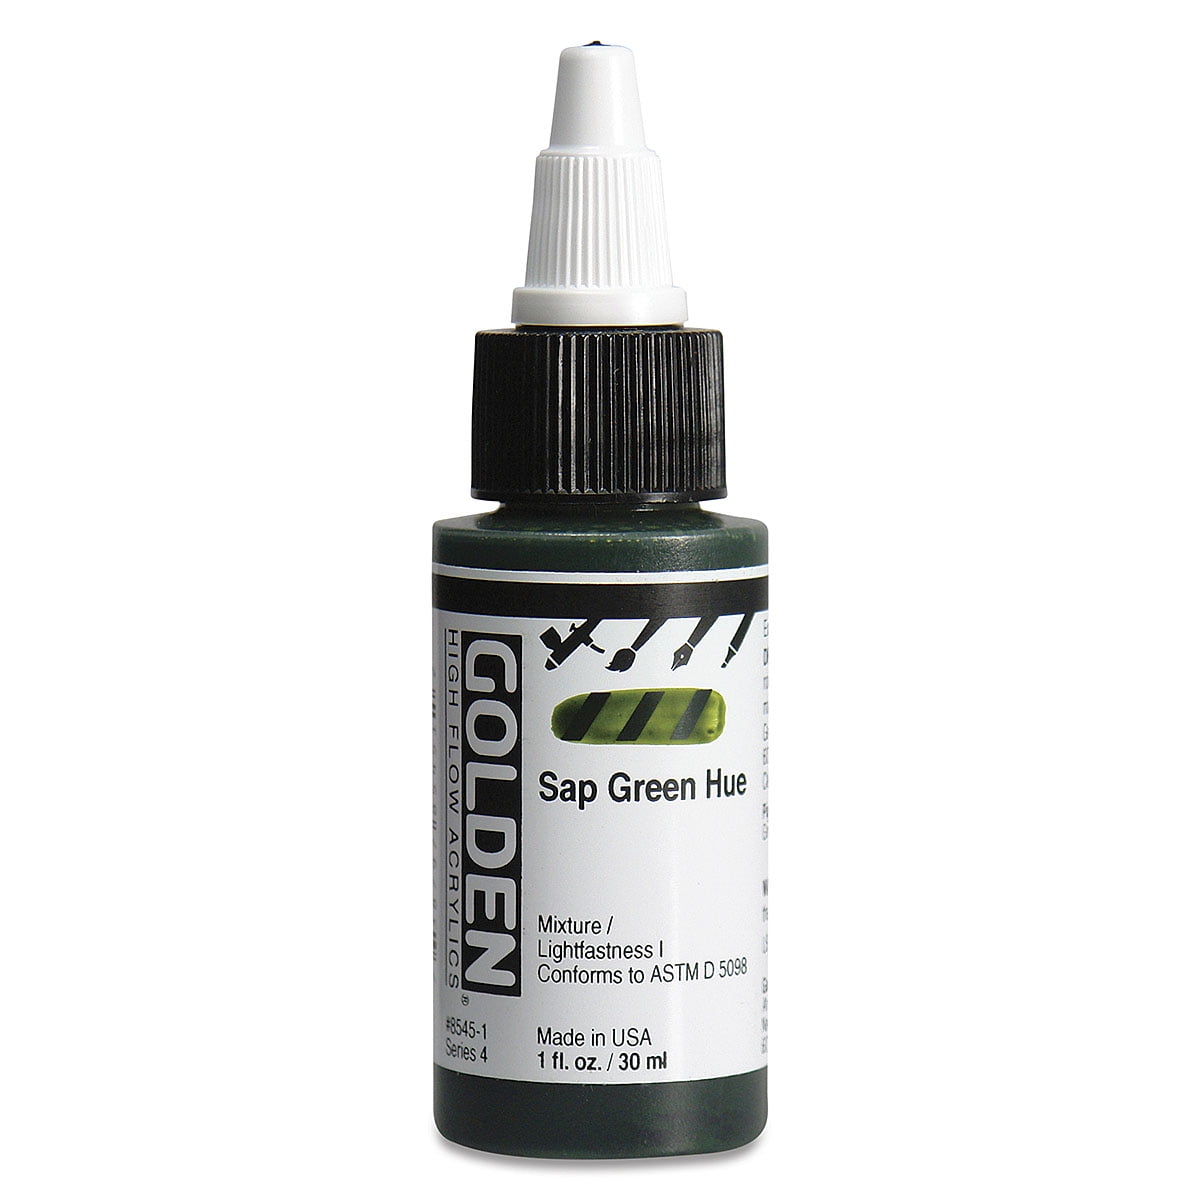 59ML Monochrome Fluorescent Night Light Two-in-one Acrylic Paint